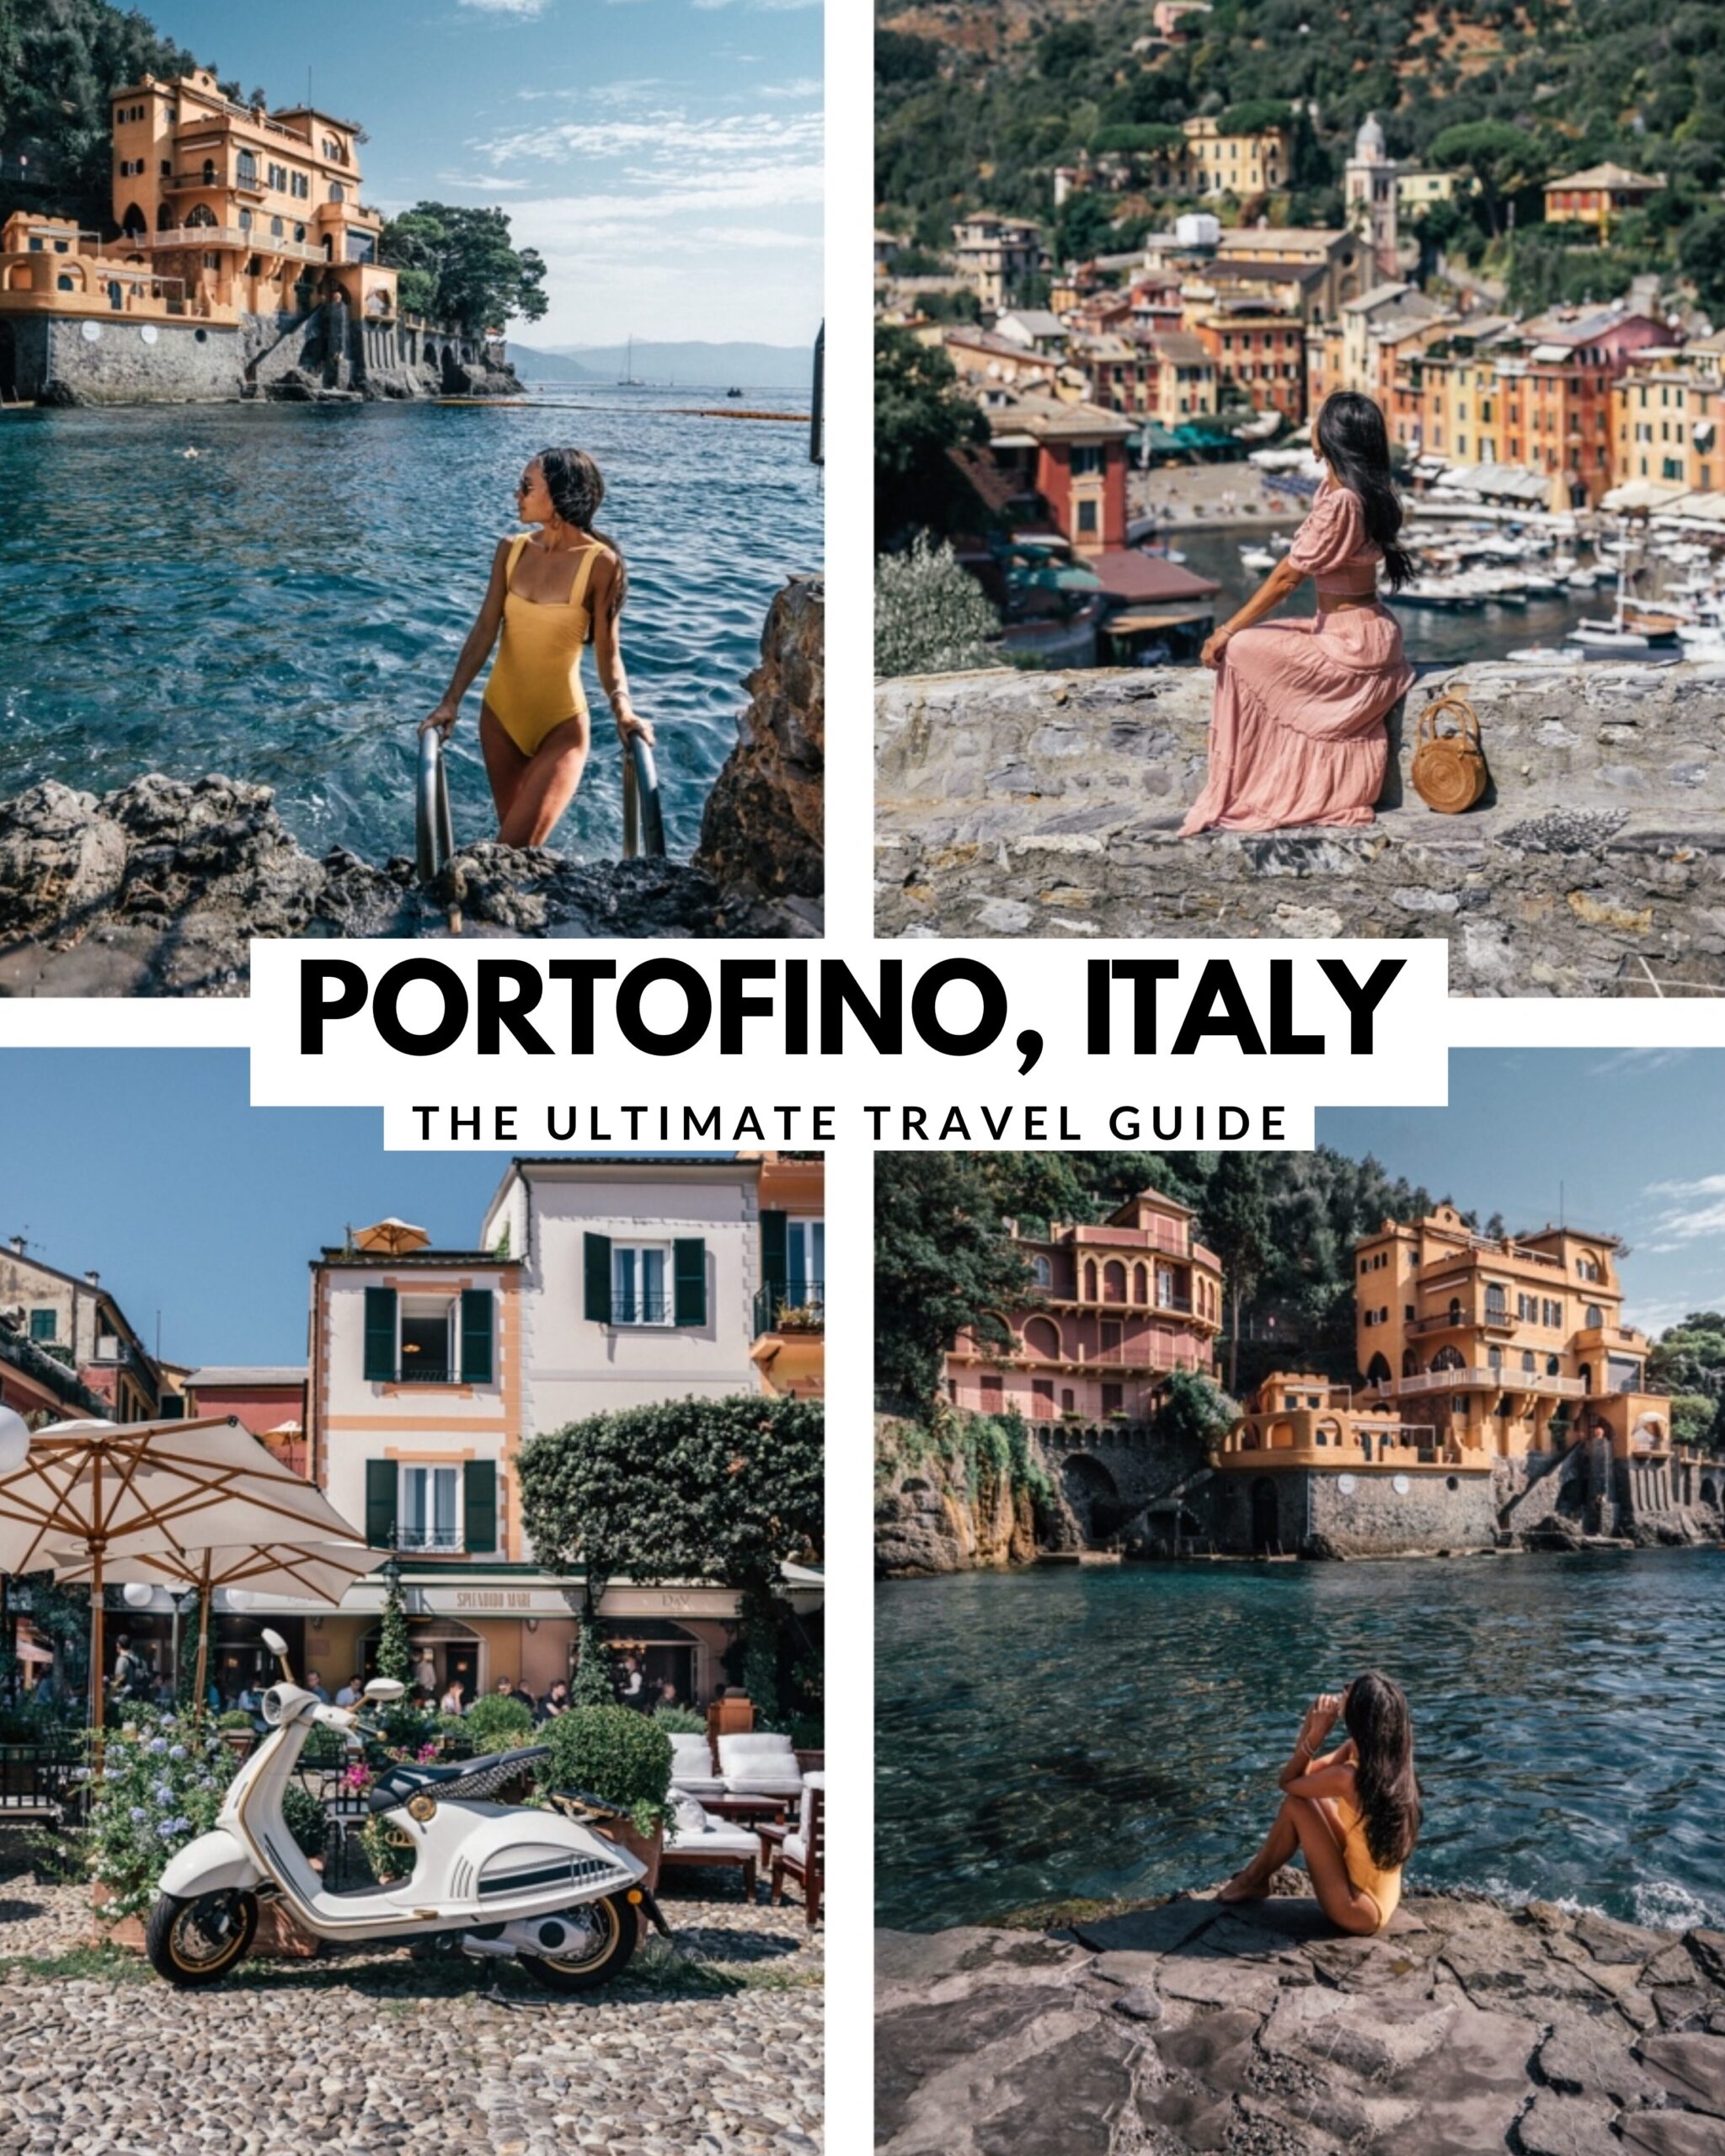 A complete travel guide to Portofino, Italy including the best sights, beaches, hotels and restaurants. 